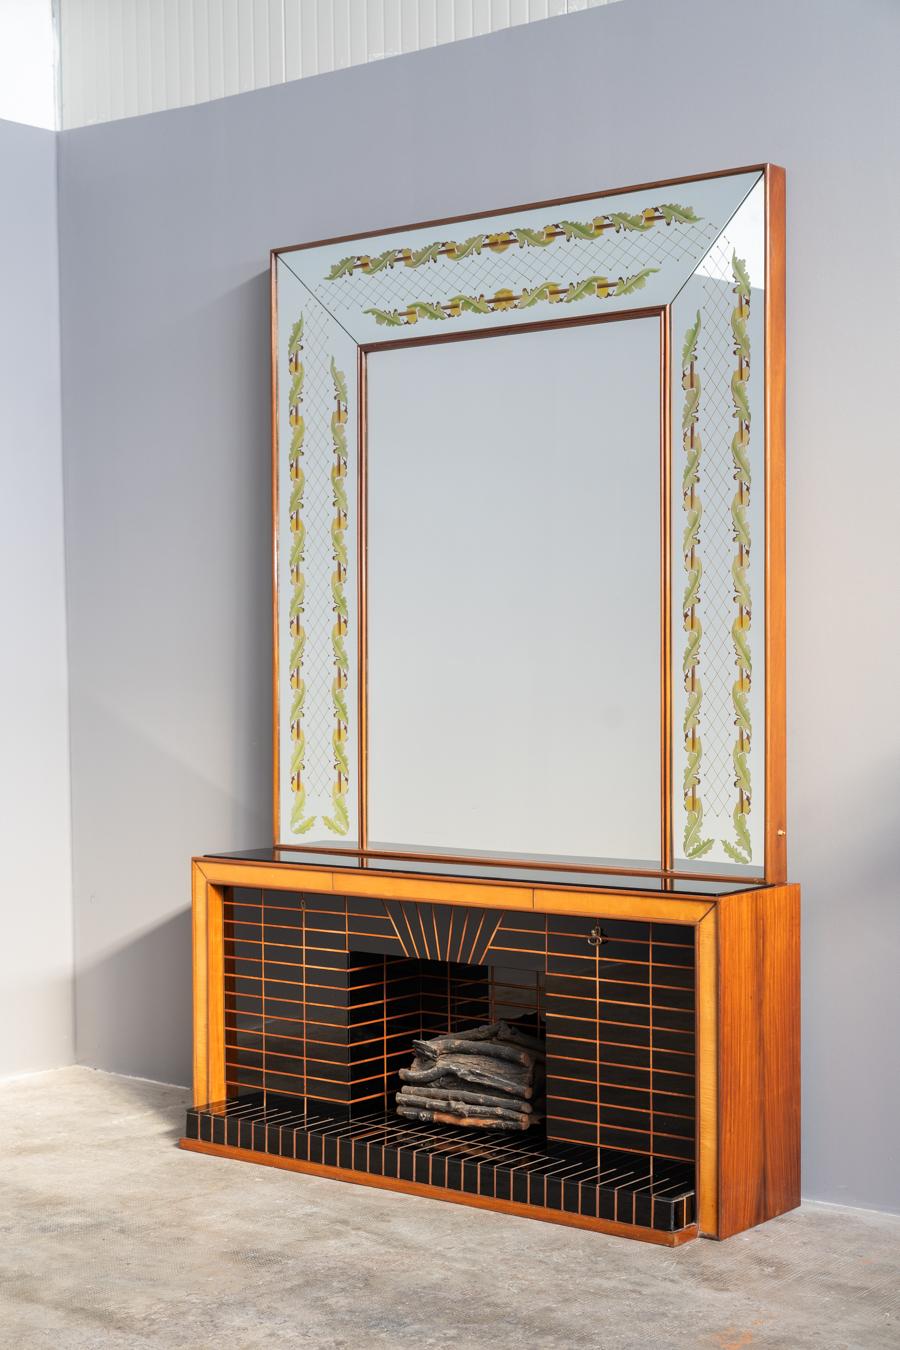 Sideboard with Mirror by Luigi Brusotti, 1940s
Chimney-shaped sideboard, tessellated in black opaline glass outlined by aceso profiles, the 45-degree closing door opens to a mirror mosaic interior, the top is black opaline, the body rosewood. The